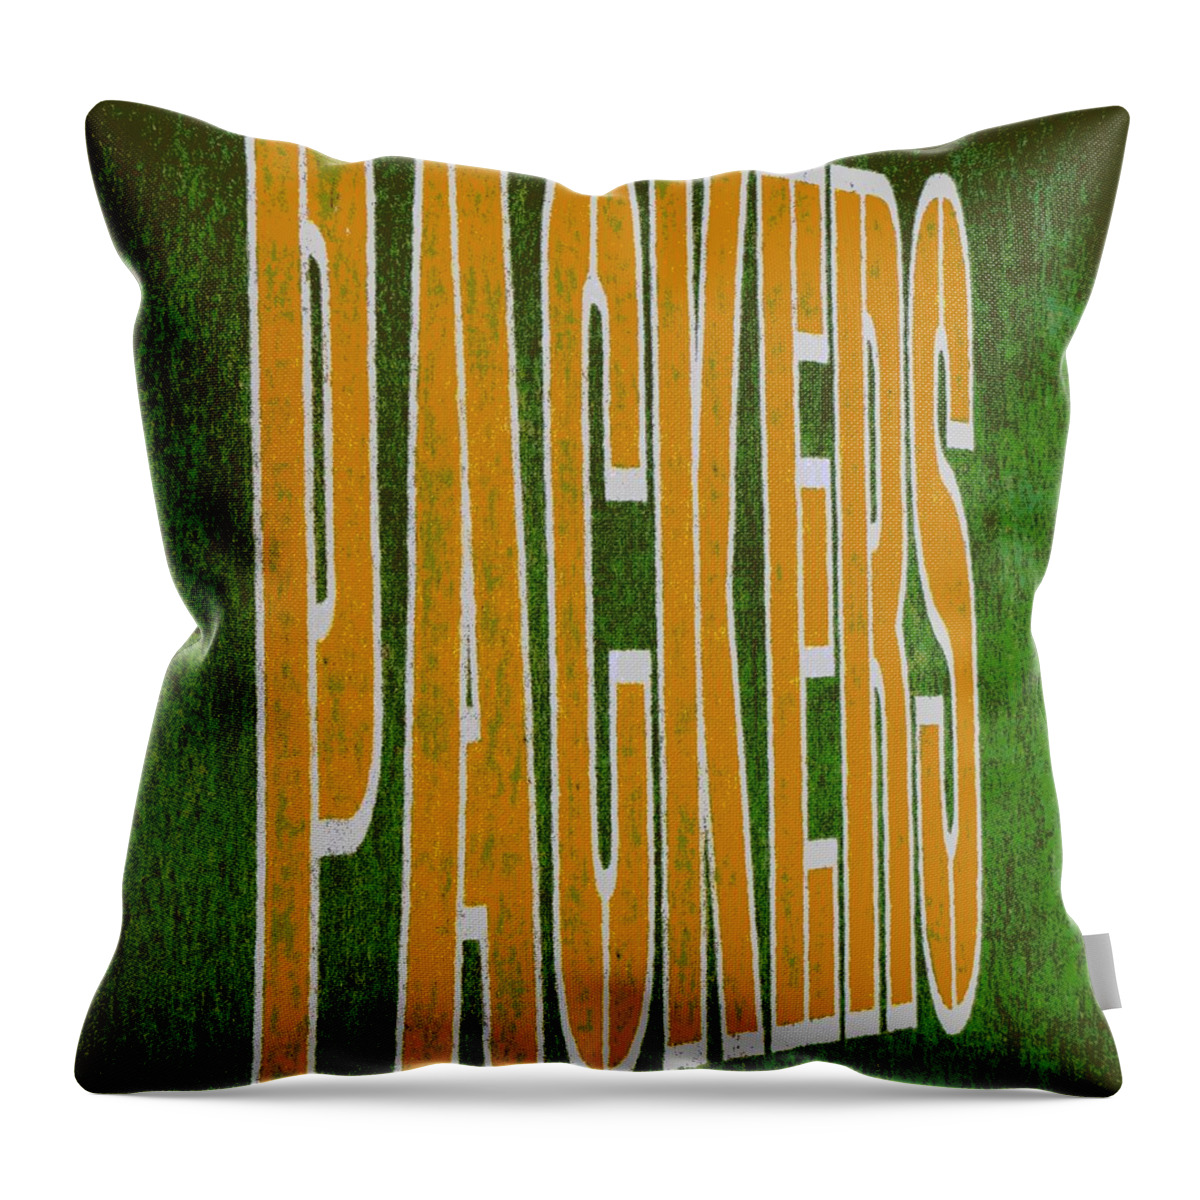 Packers Throw Pillow featuring the photograph Packers by Deena Stoddard